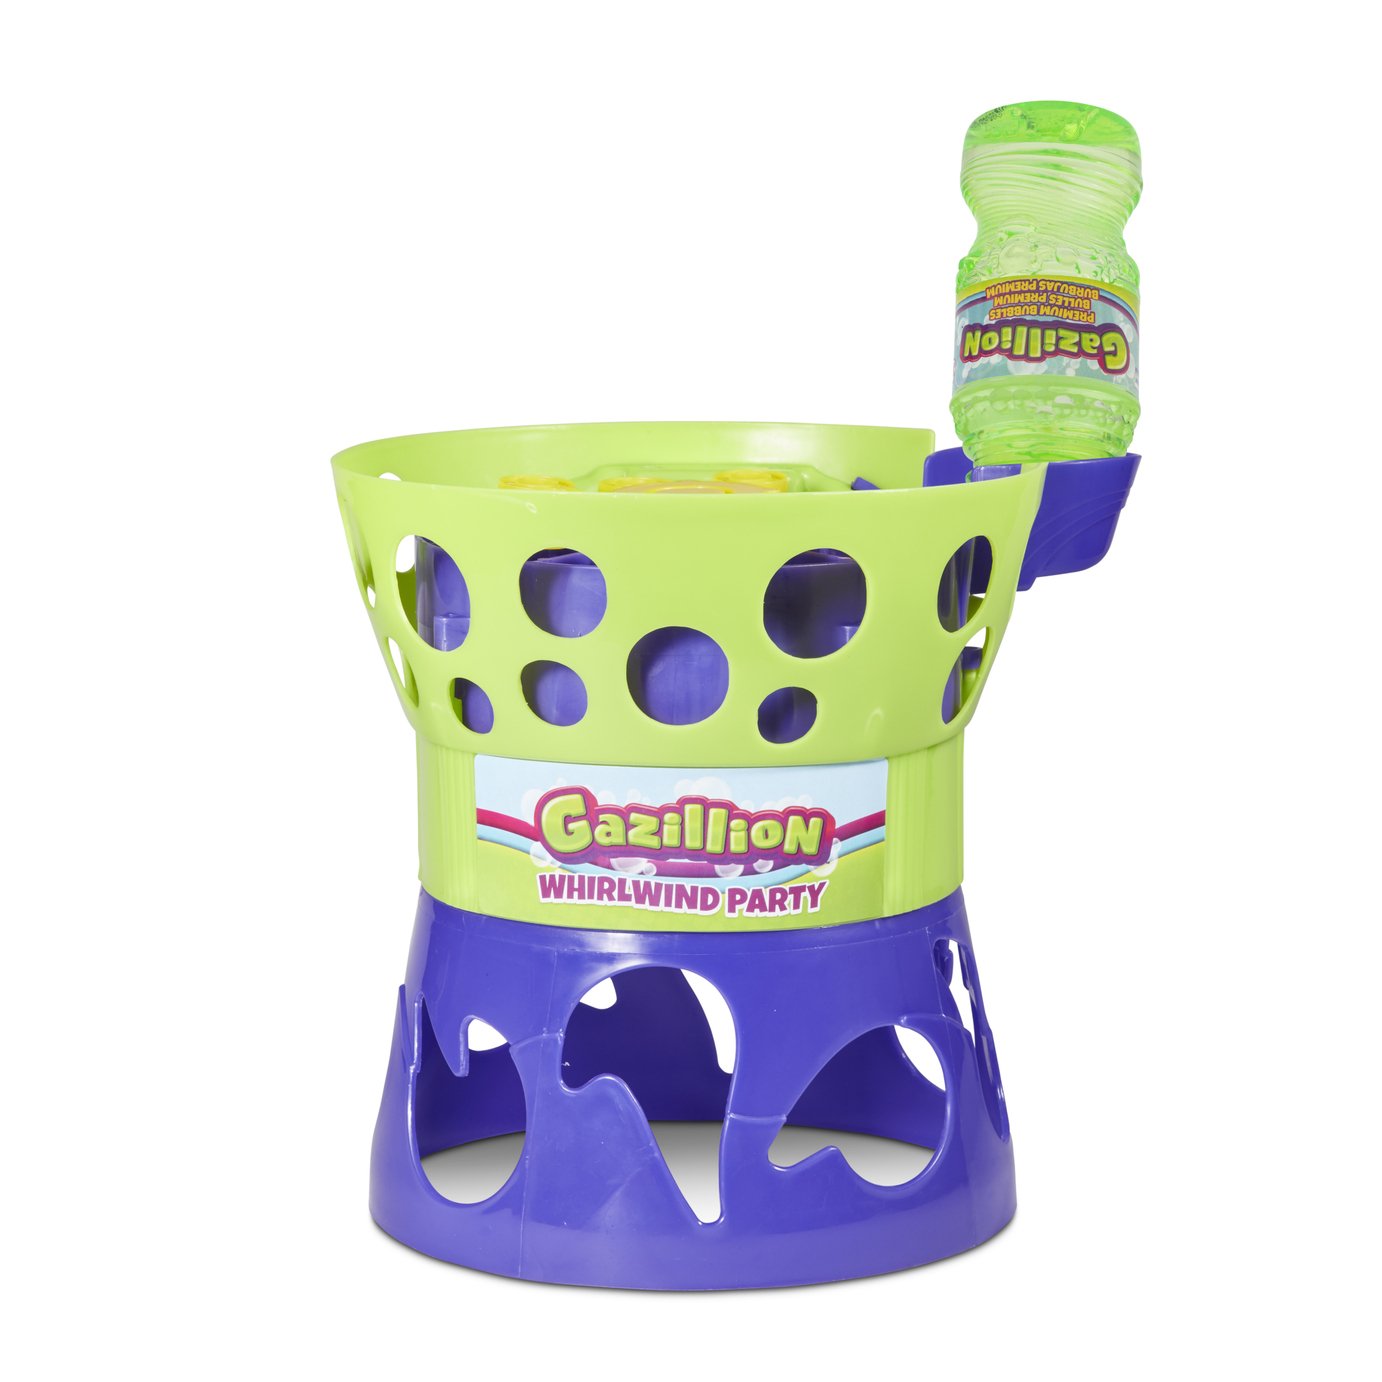 Whirlwind Party Bubble Machine Review